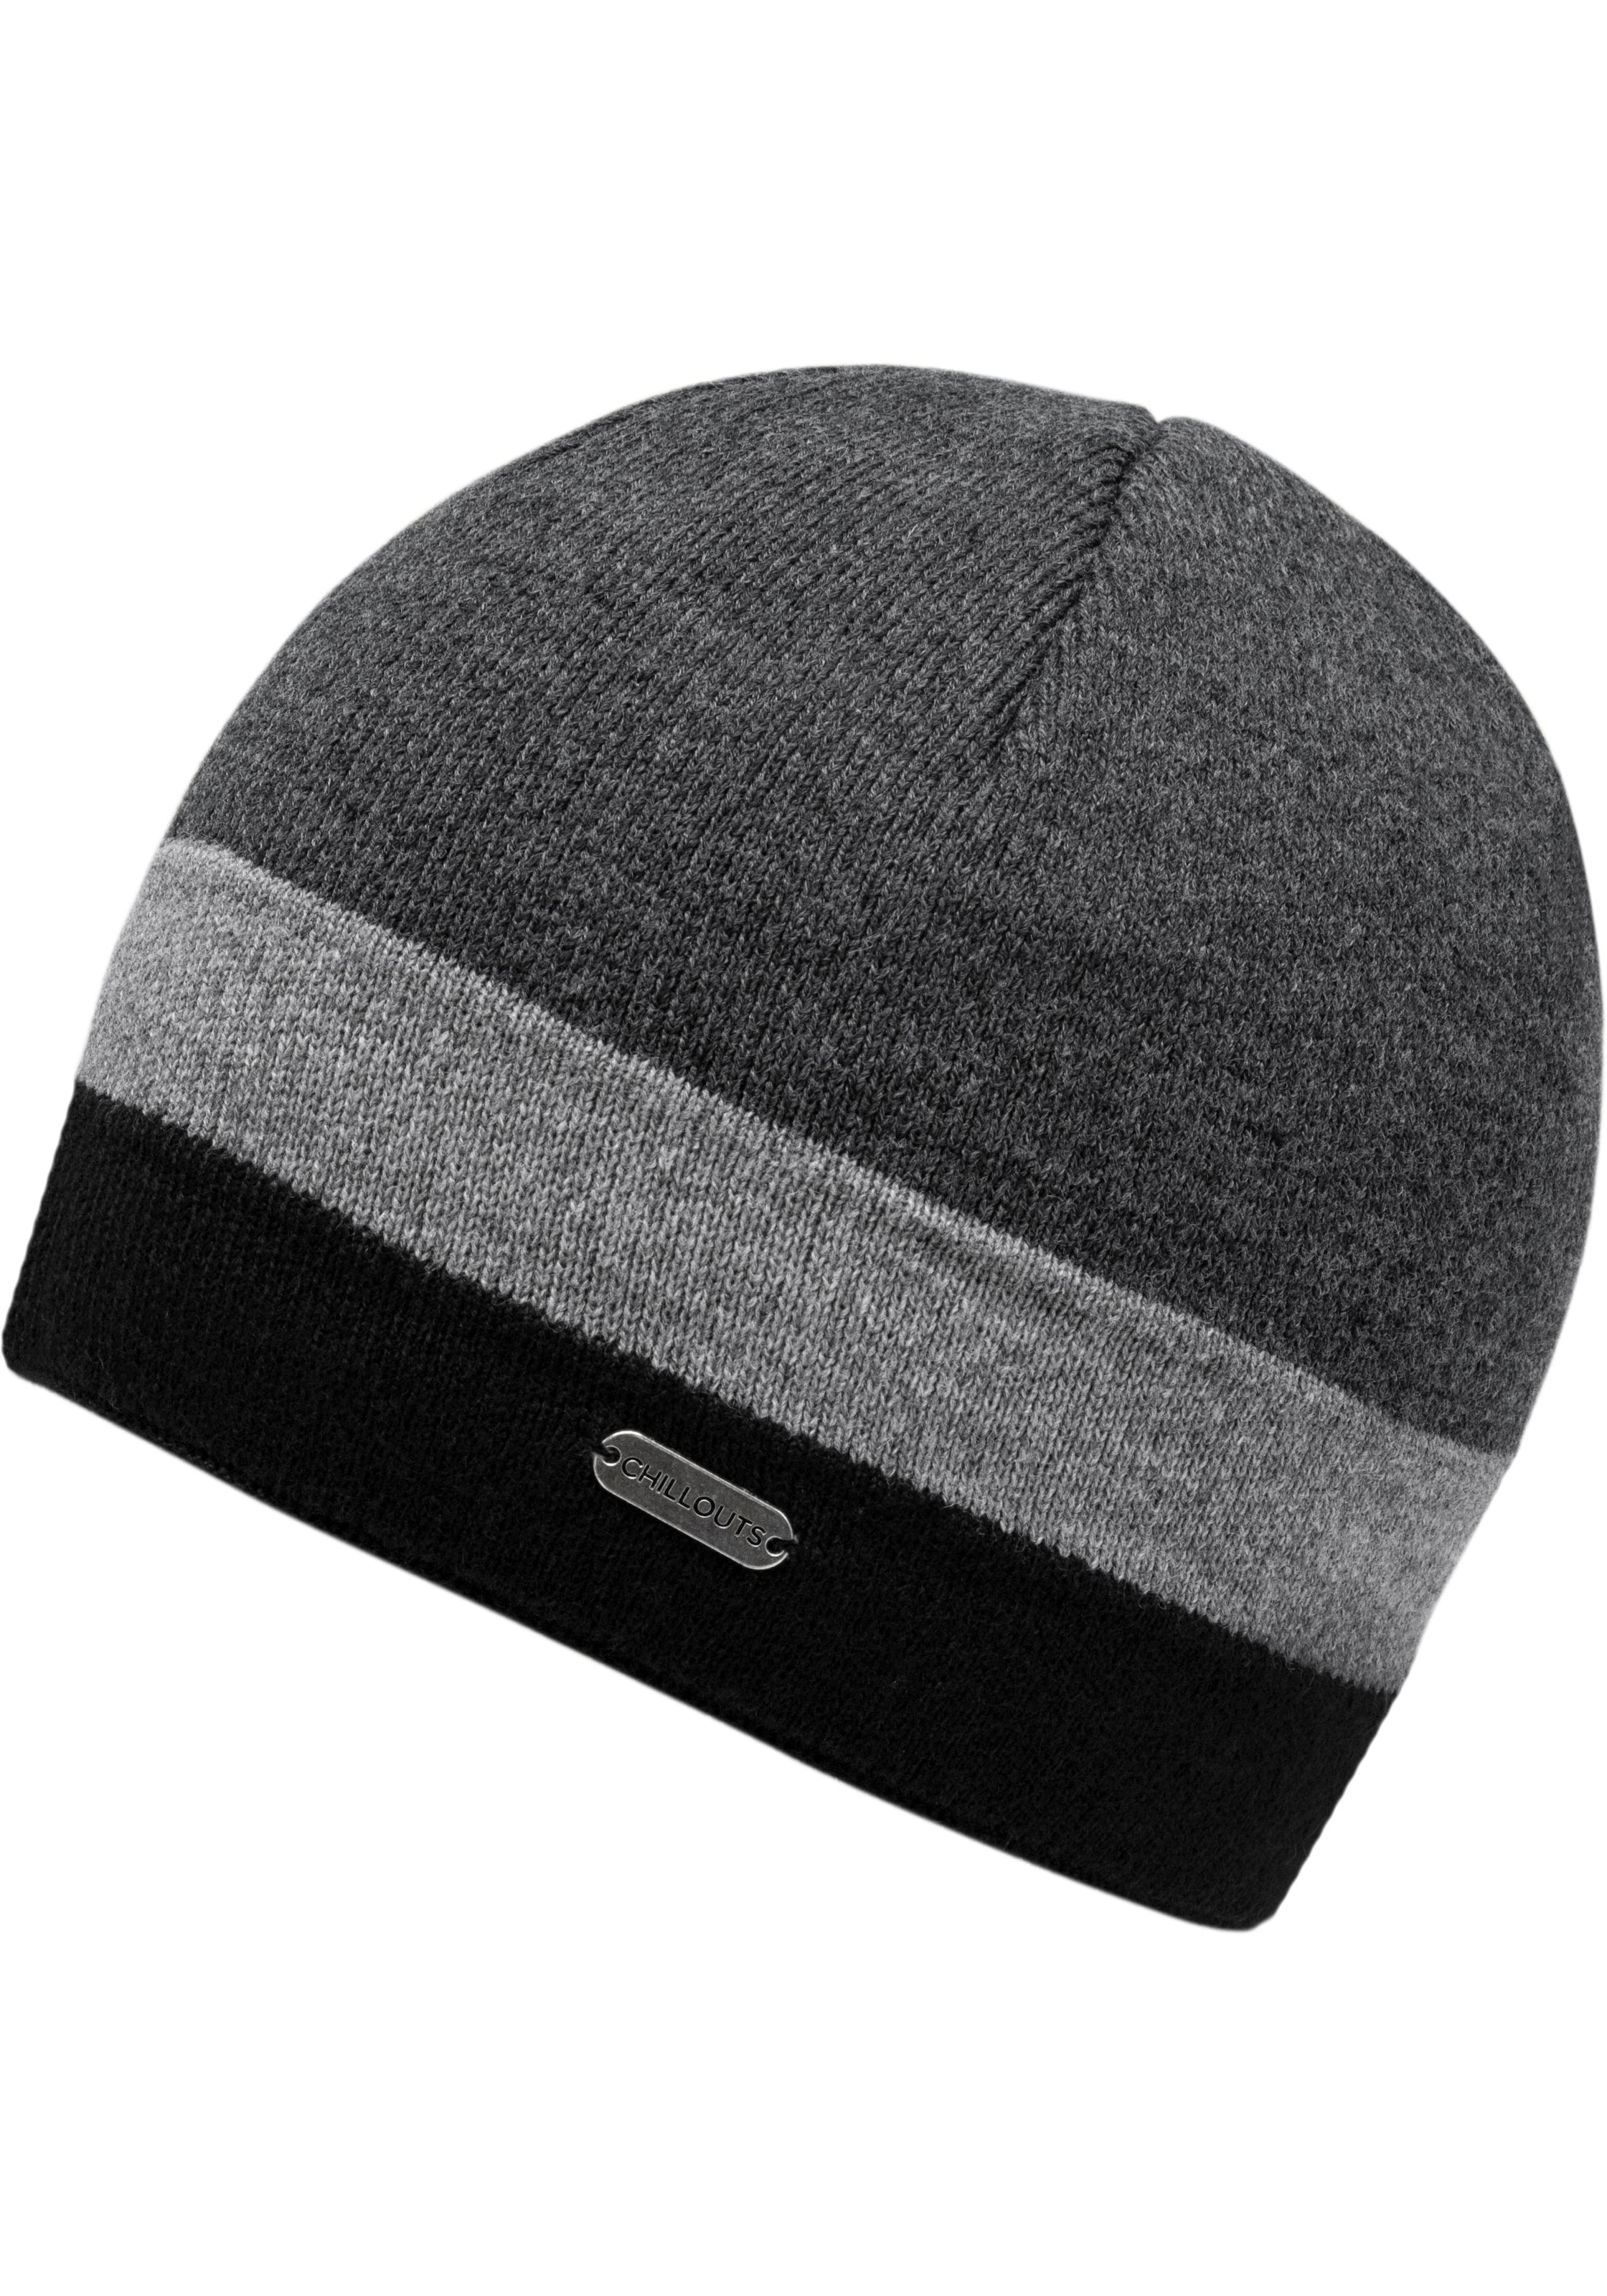 chillouts Beanie »Johnny Hat kaufen online UNIVERSAL Johnny Hat«, 